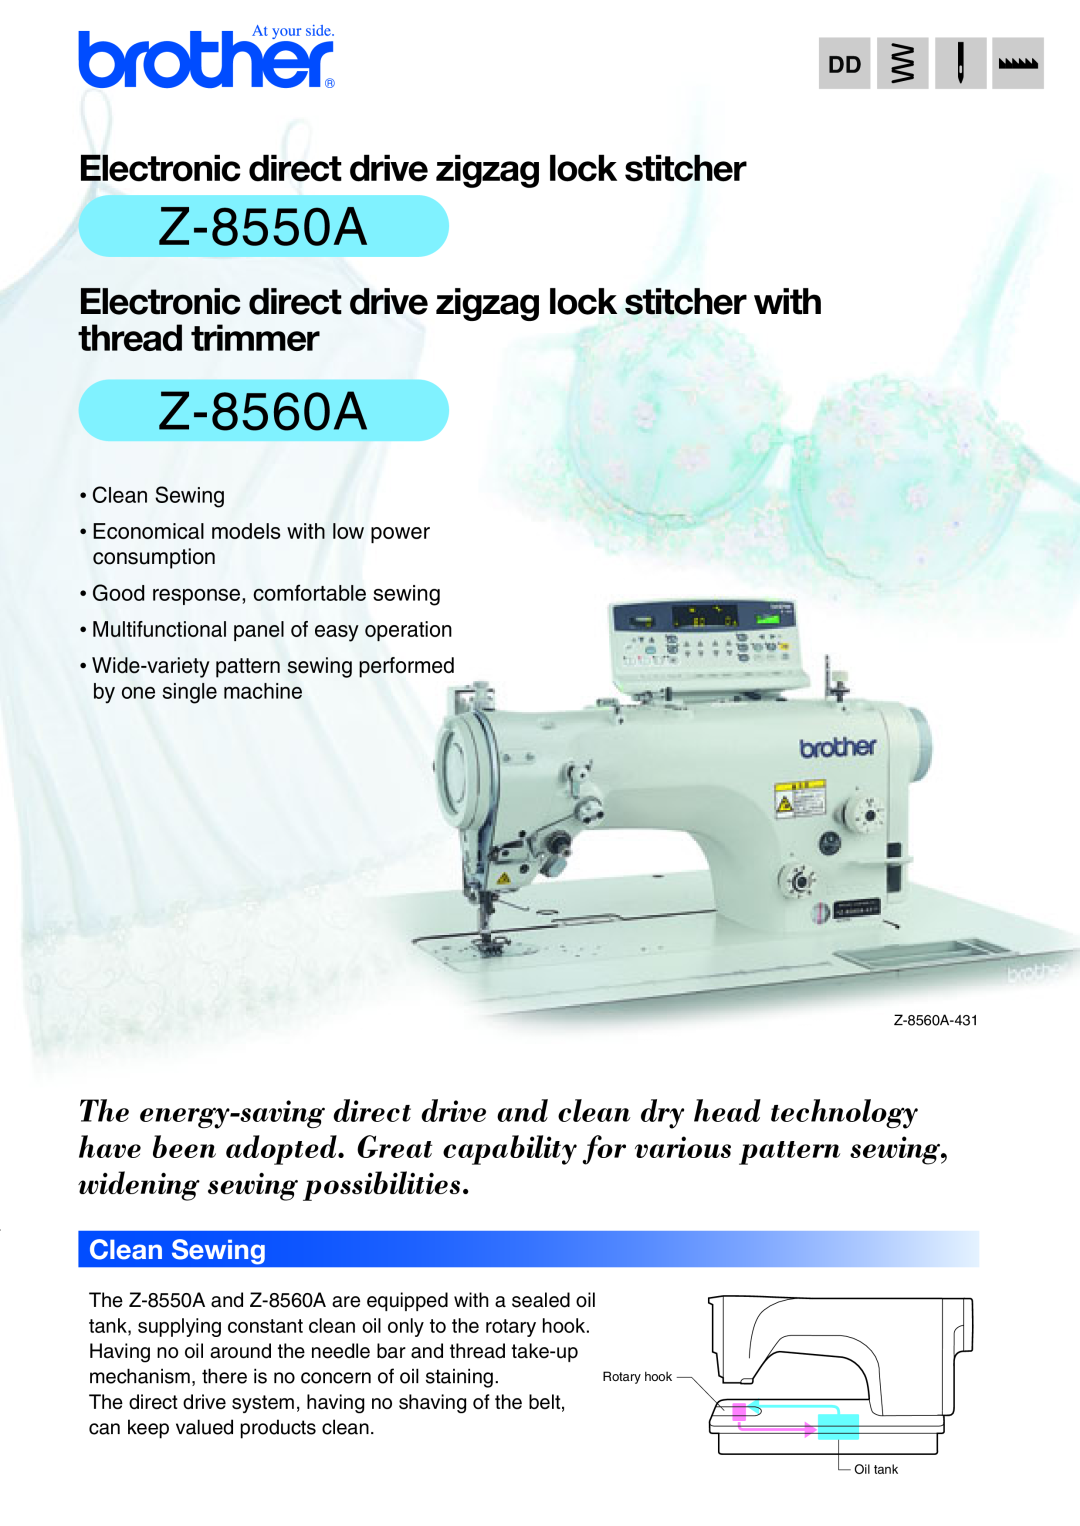 Brother Z-8560A manual Clean Sewing, Z-8550A, Electronic direct drive zigzag lock stitcher 